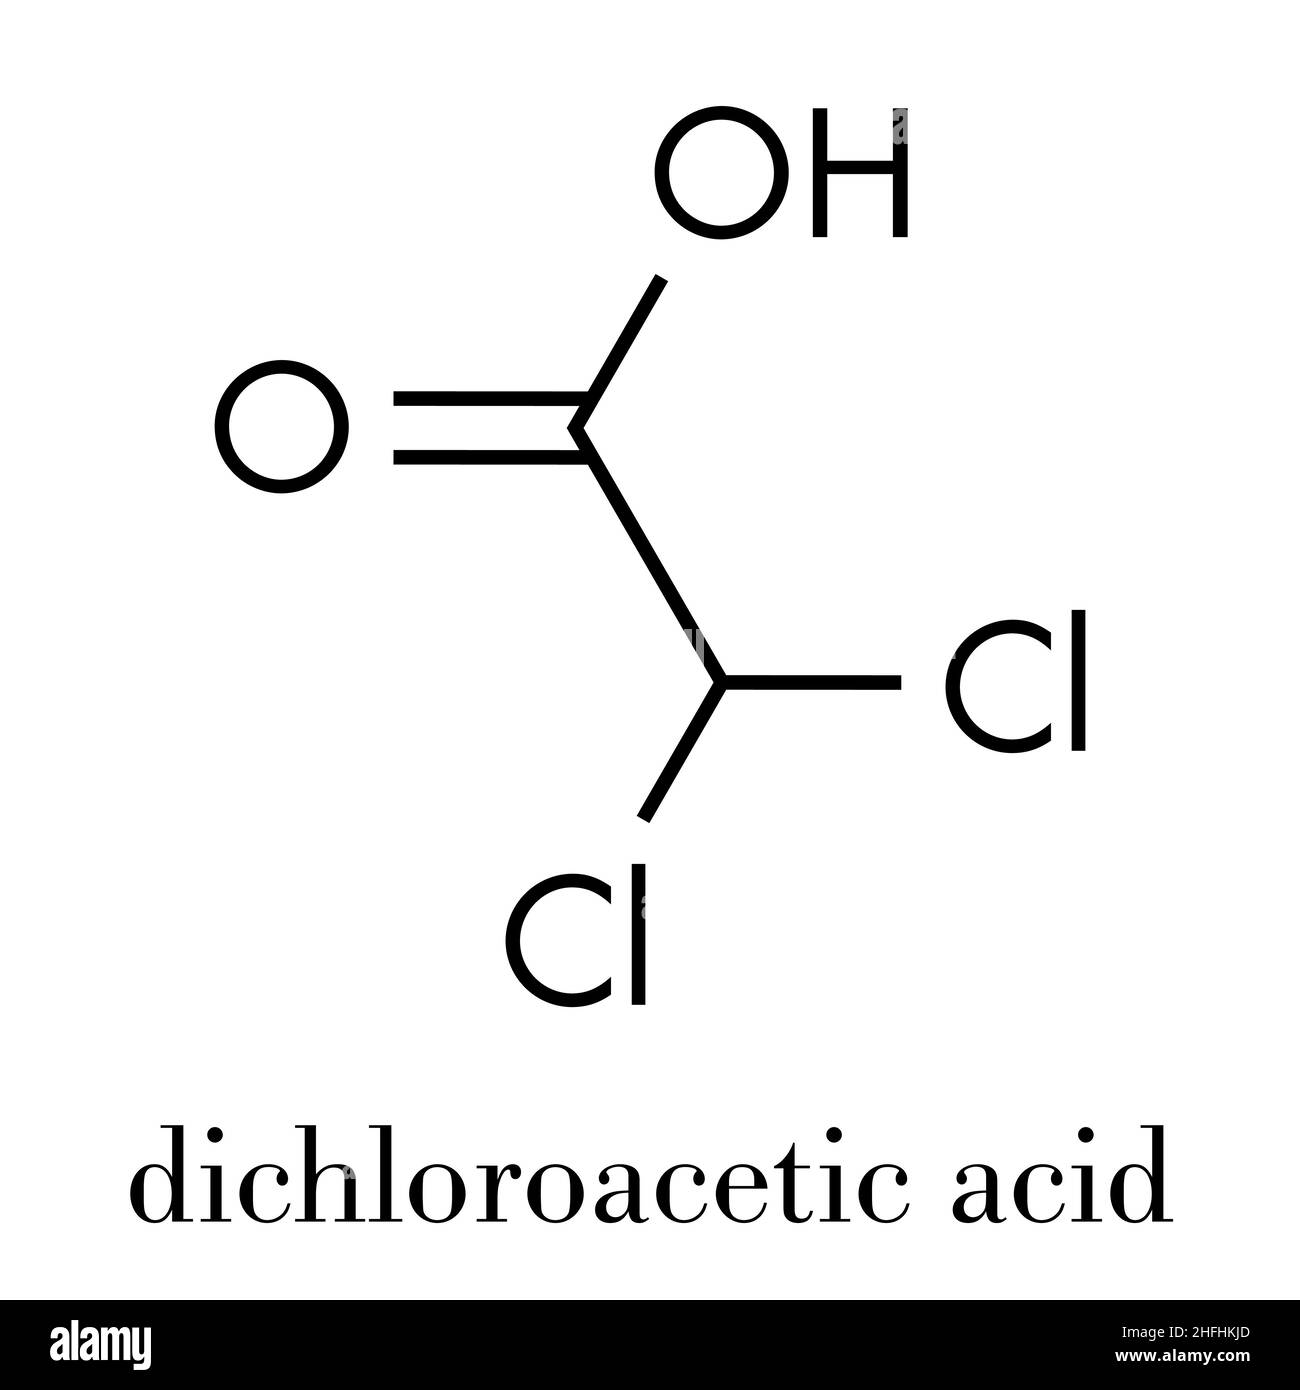 Dichloroacetic acid (DCA). Dichloroacetate salts inhibit the enzyme pyruvate dehydrogenase kinase and are evaluated in the treatment of cancer. Skelet Stock Vector